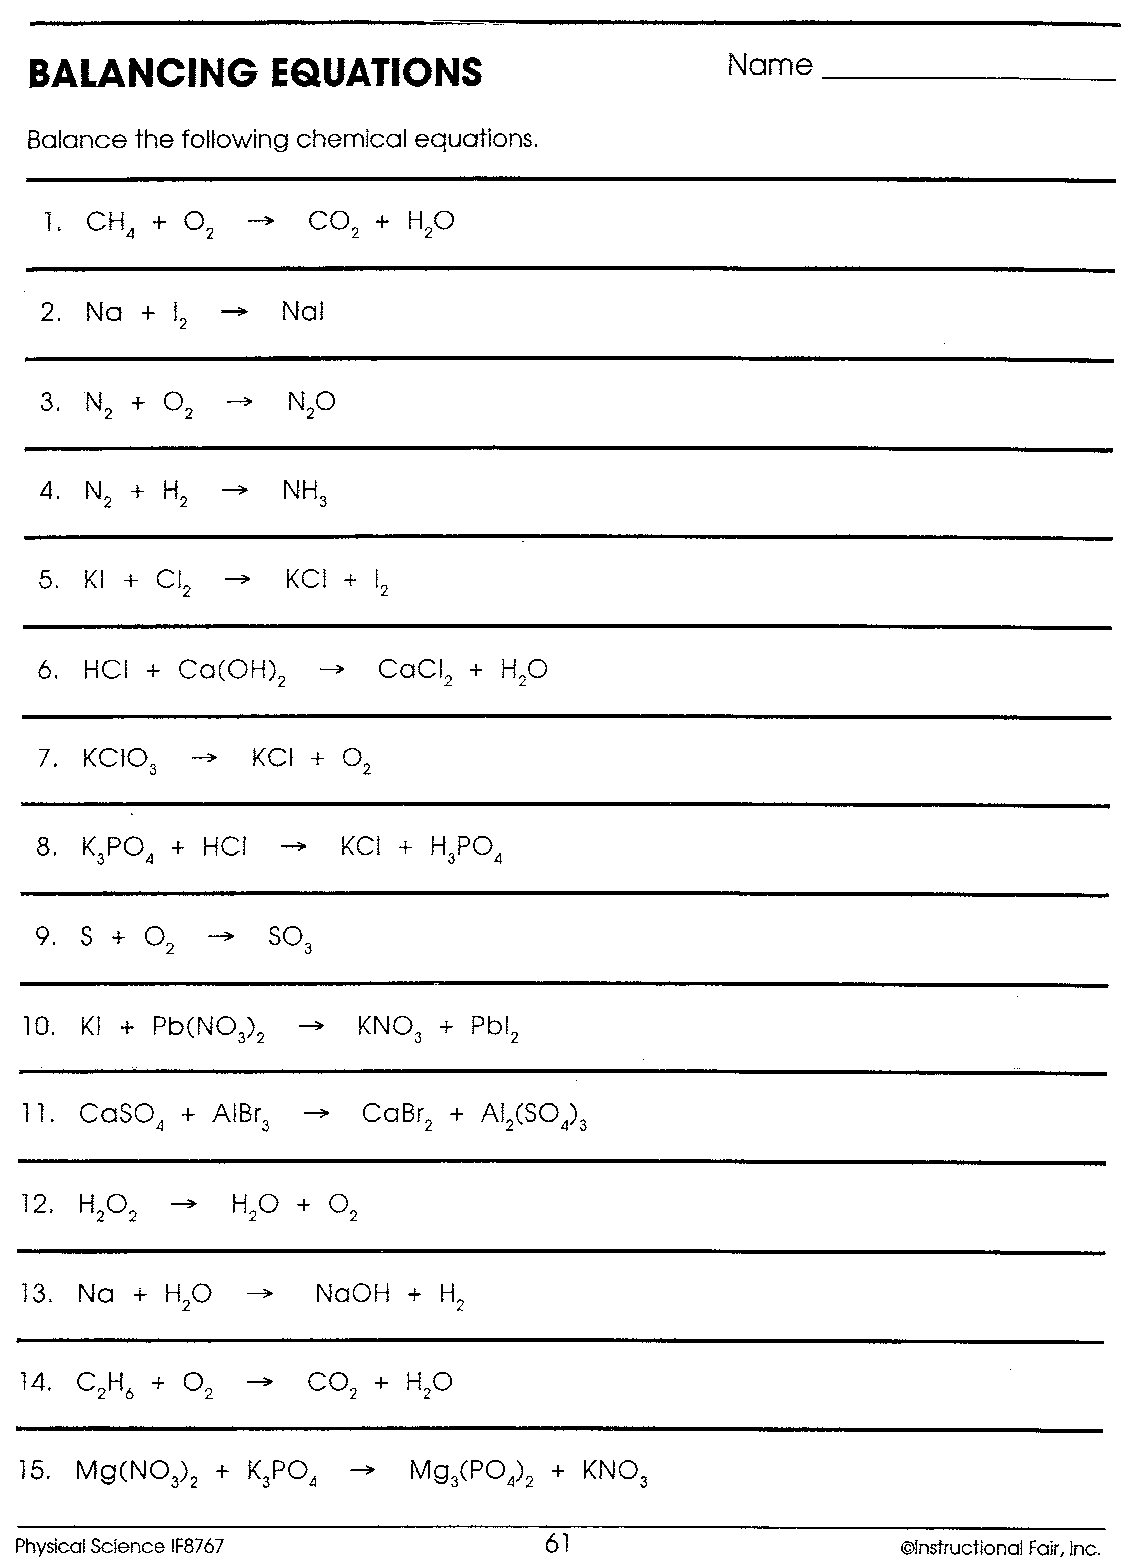 balancing equations worksheet answers physical science if8767